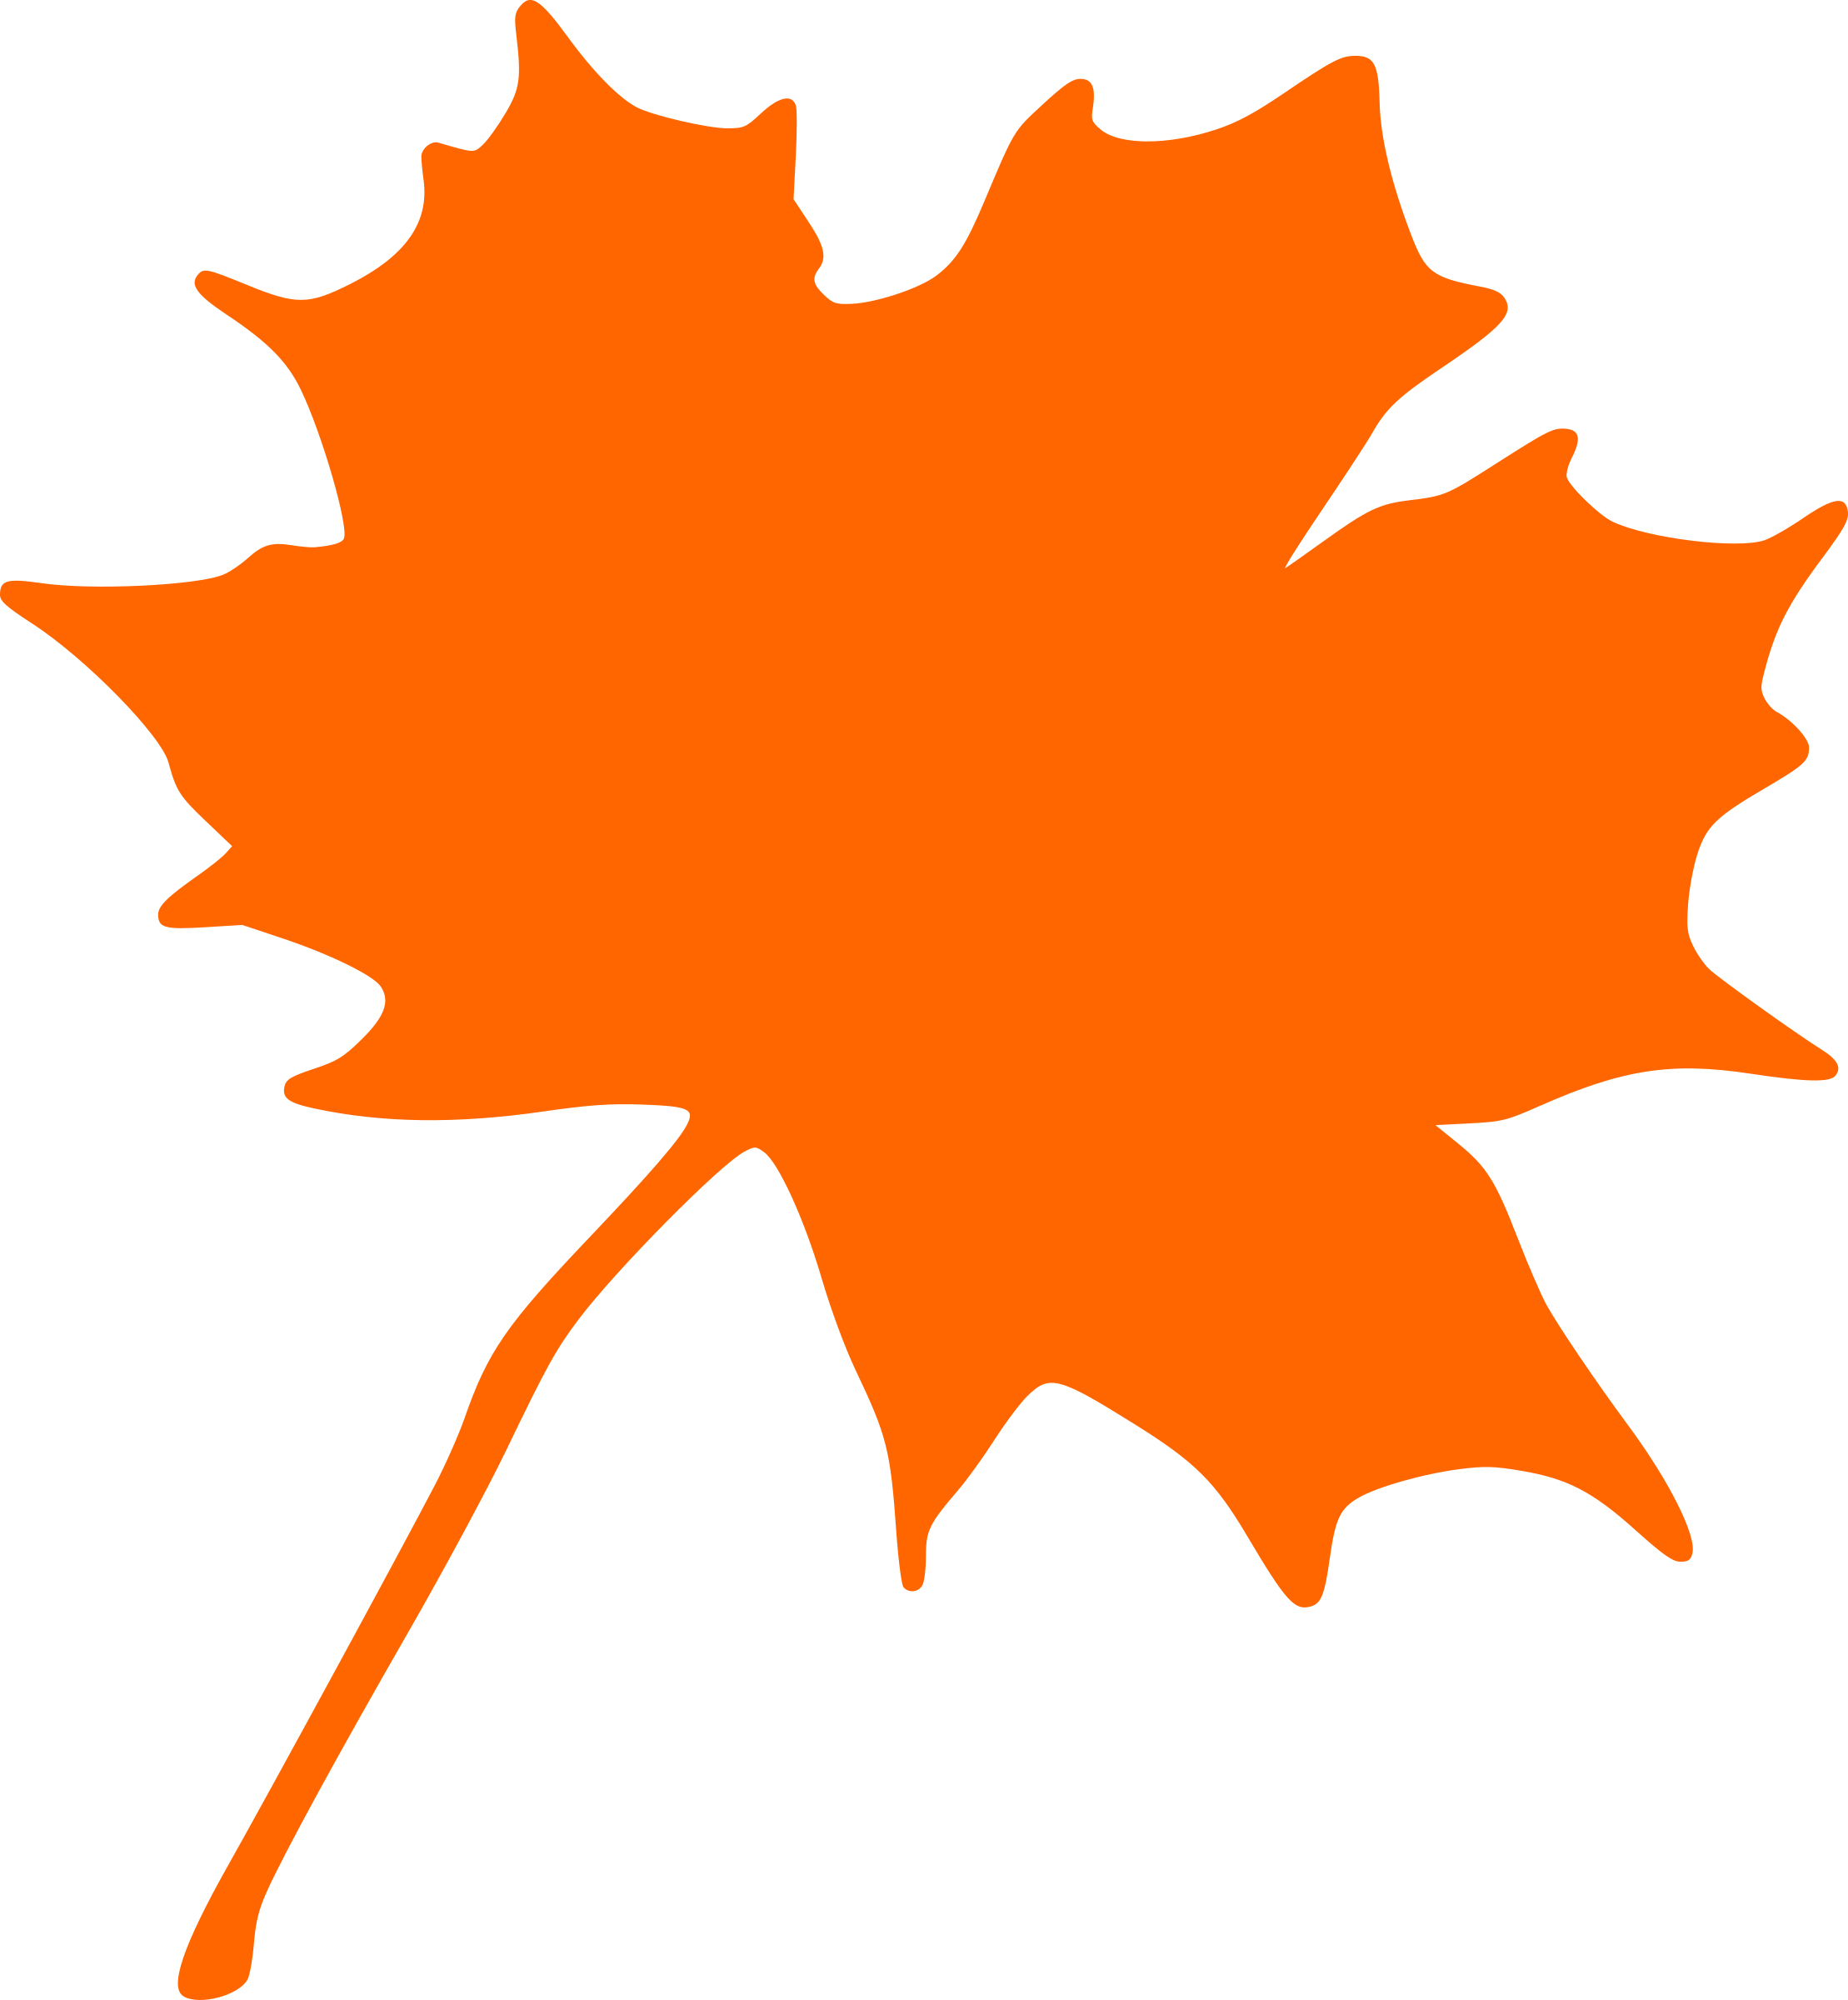 Clipart leaves svg. Maple leaf icons png